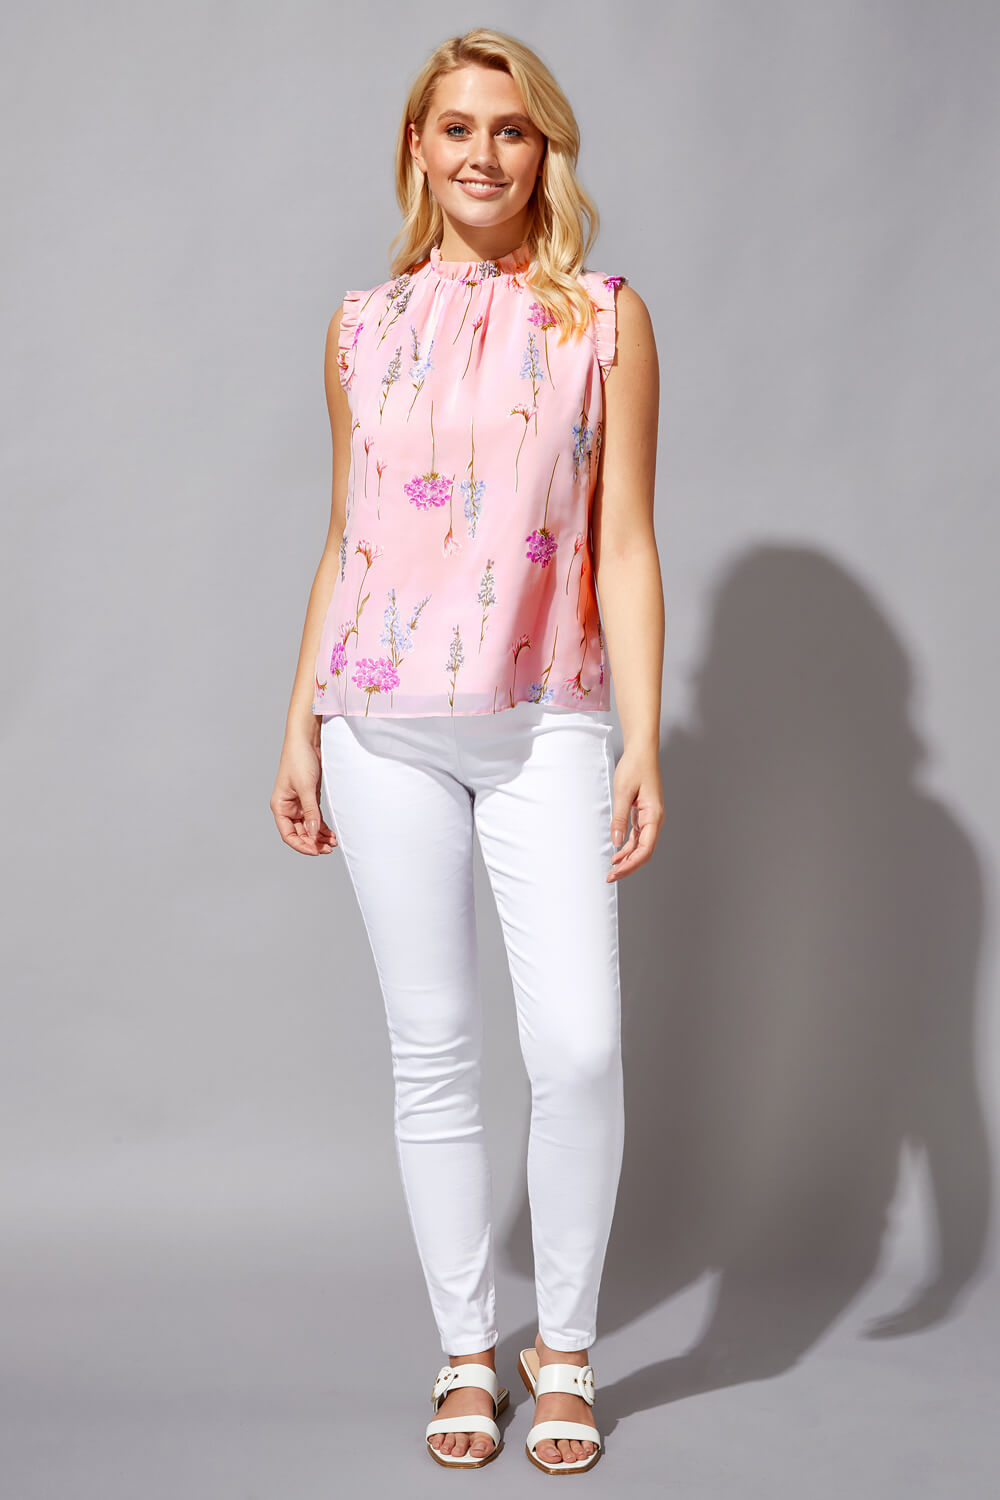 PINK Floral Frill Detail Top, Image 2 of 4